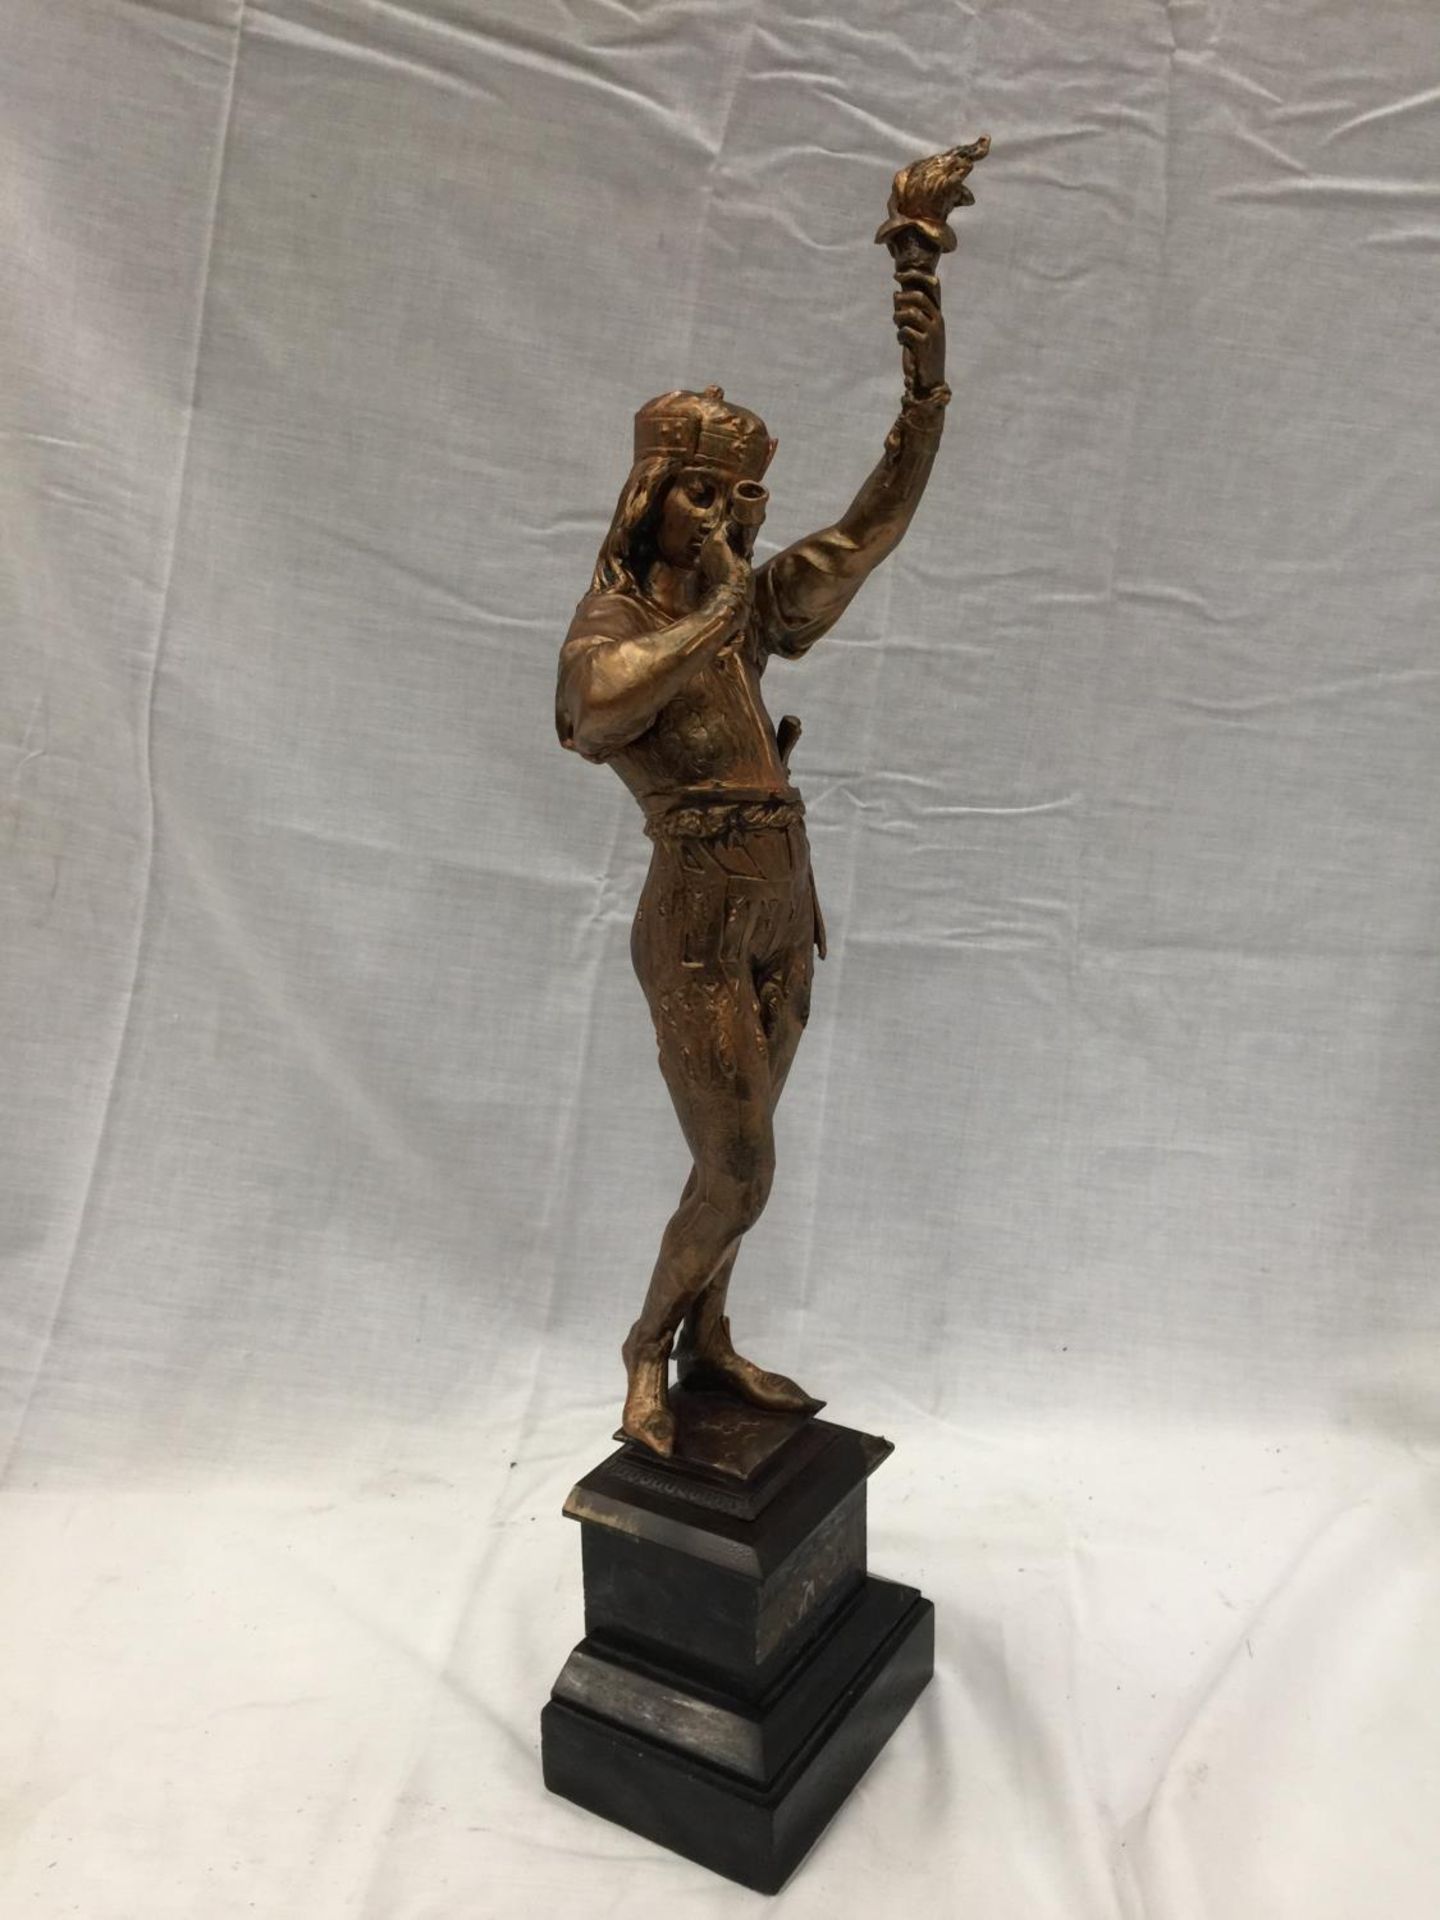 A METAL STATUETTE OF A CLASSICAL FIGURE ON A PLINT HEIGHT 60CM - Image 6 of 12